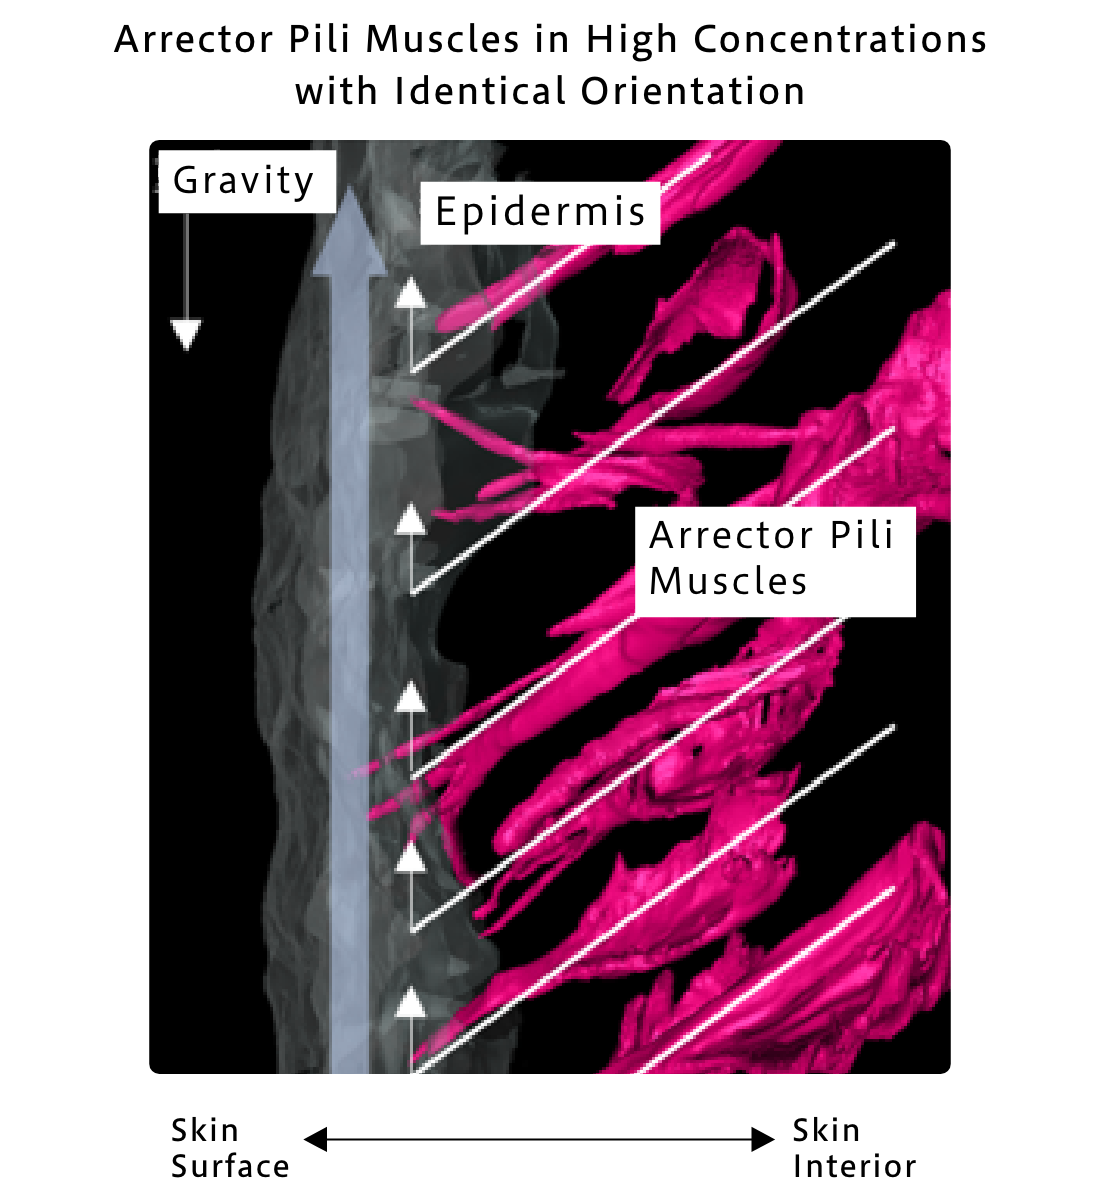 Arrector Pili Muscles in High Concentrations with Identical Orientation